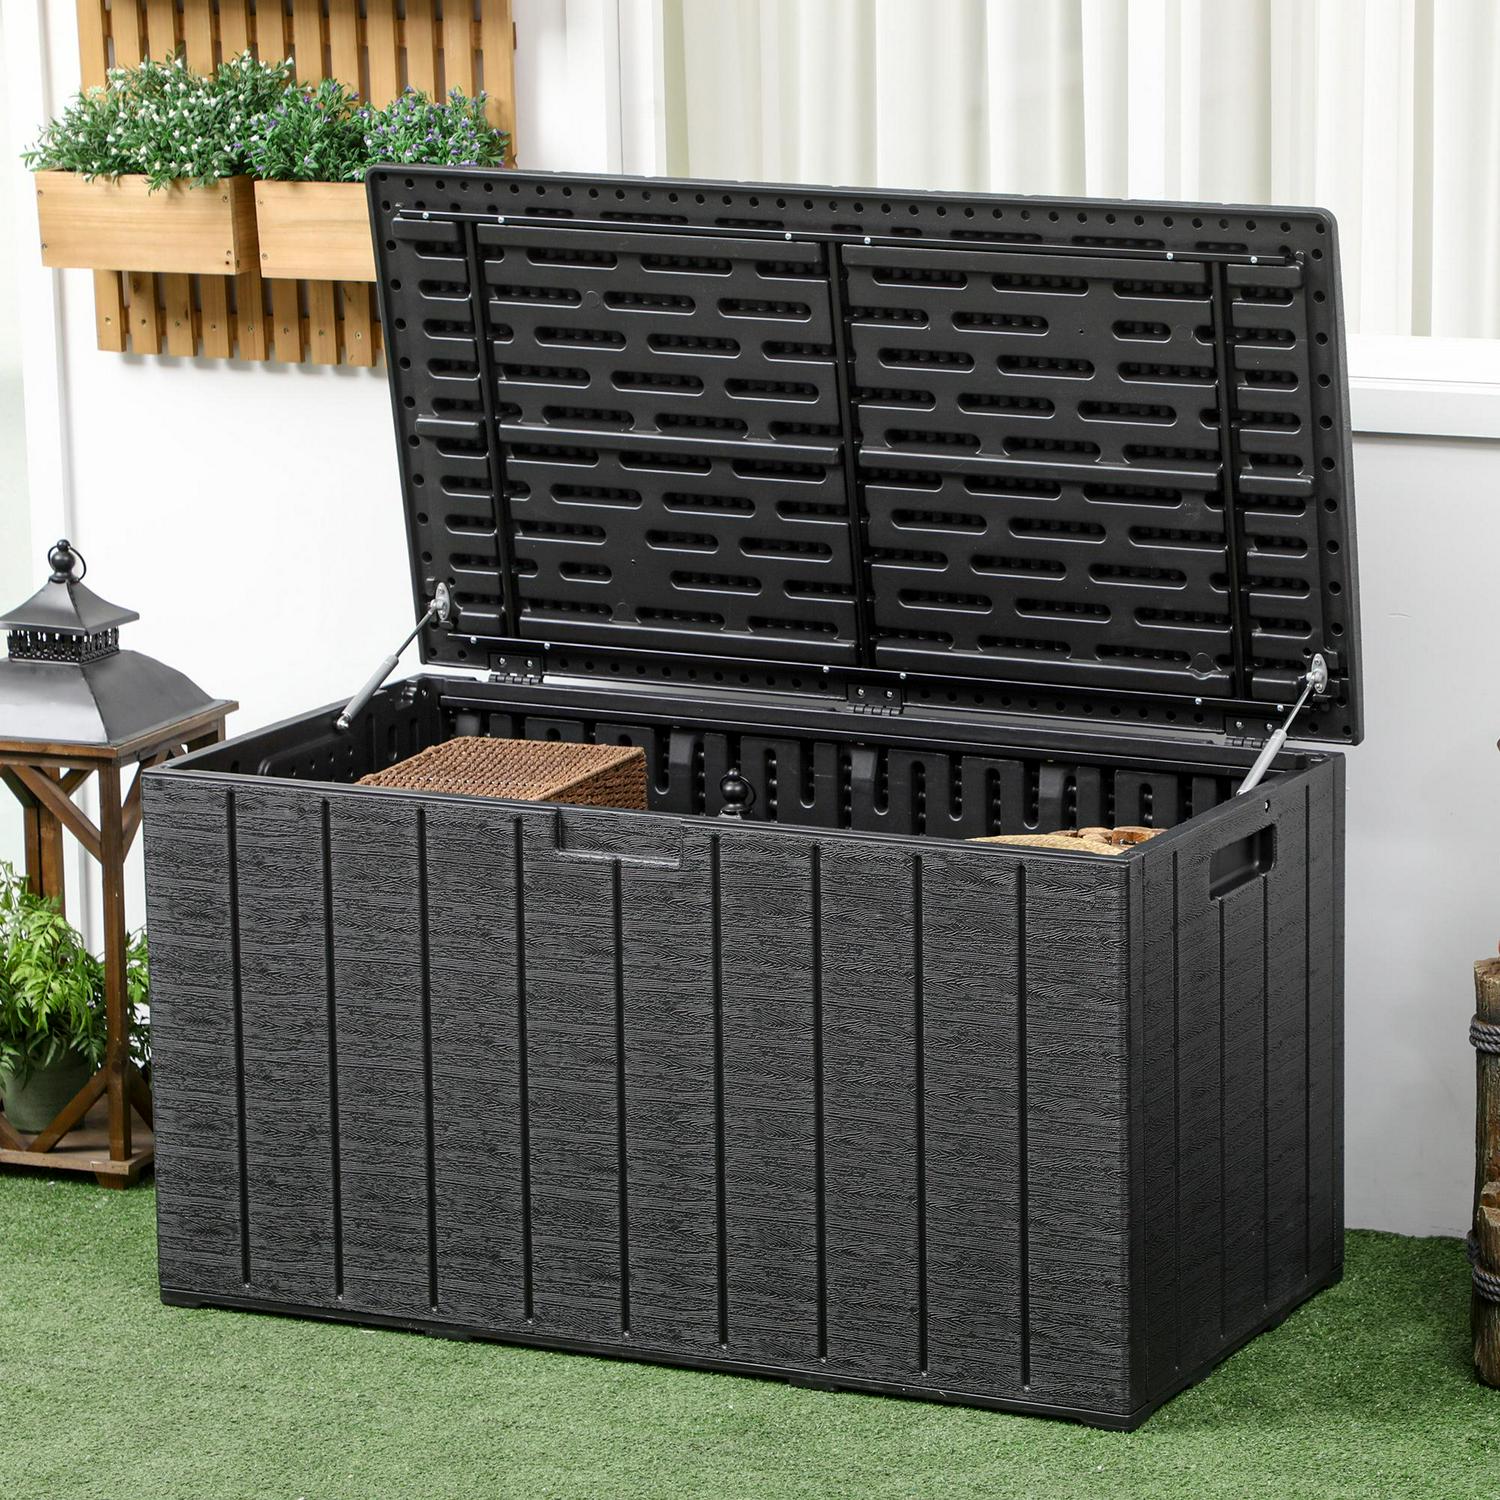 336 Litre Extra Large Outdoor Garden Storage Box, Water-resistant Heavy Duty Double Wall Plastic Container, Furniture Organizer, Black